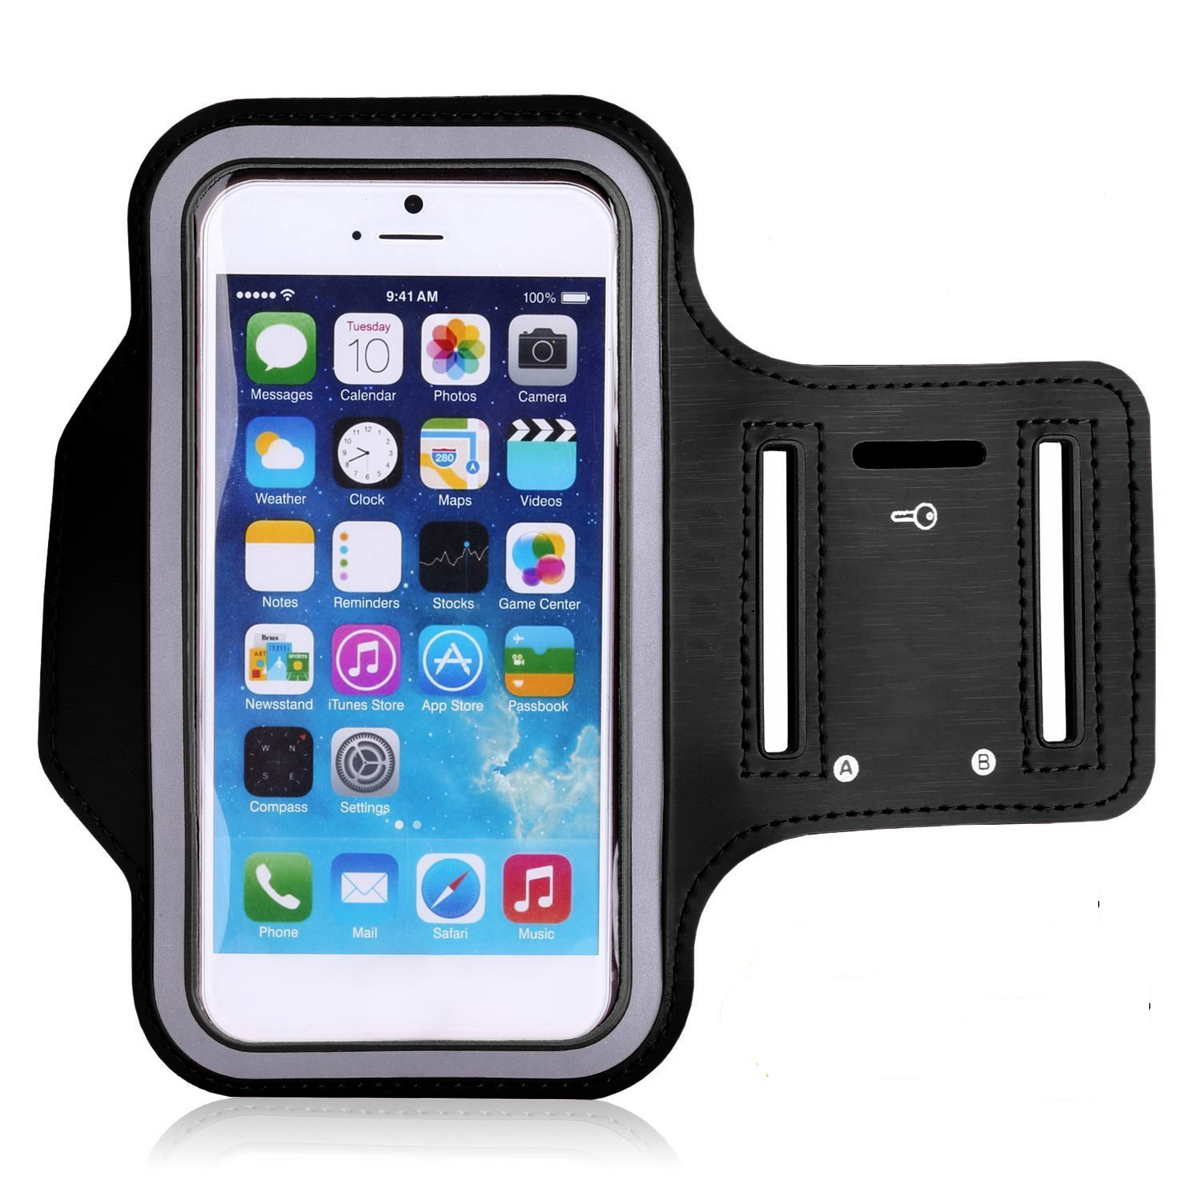 Universal-Sports-Elastic-Armband-Sweatproof-Touch-Screen-Mobile-Phone-Arm-Bags-with-Earphone-Port-fo-1890485-1